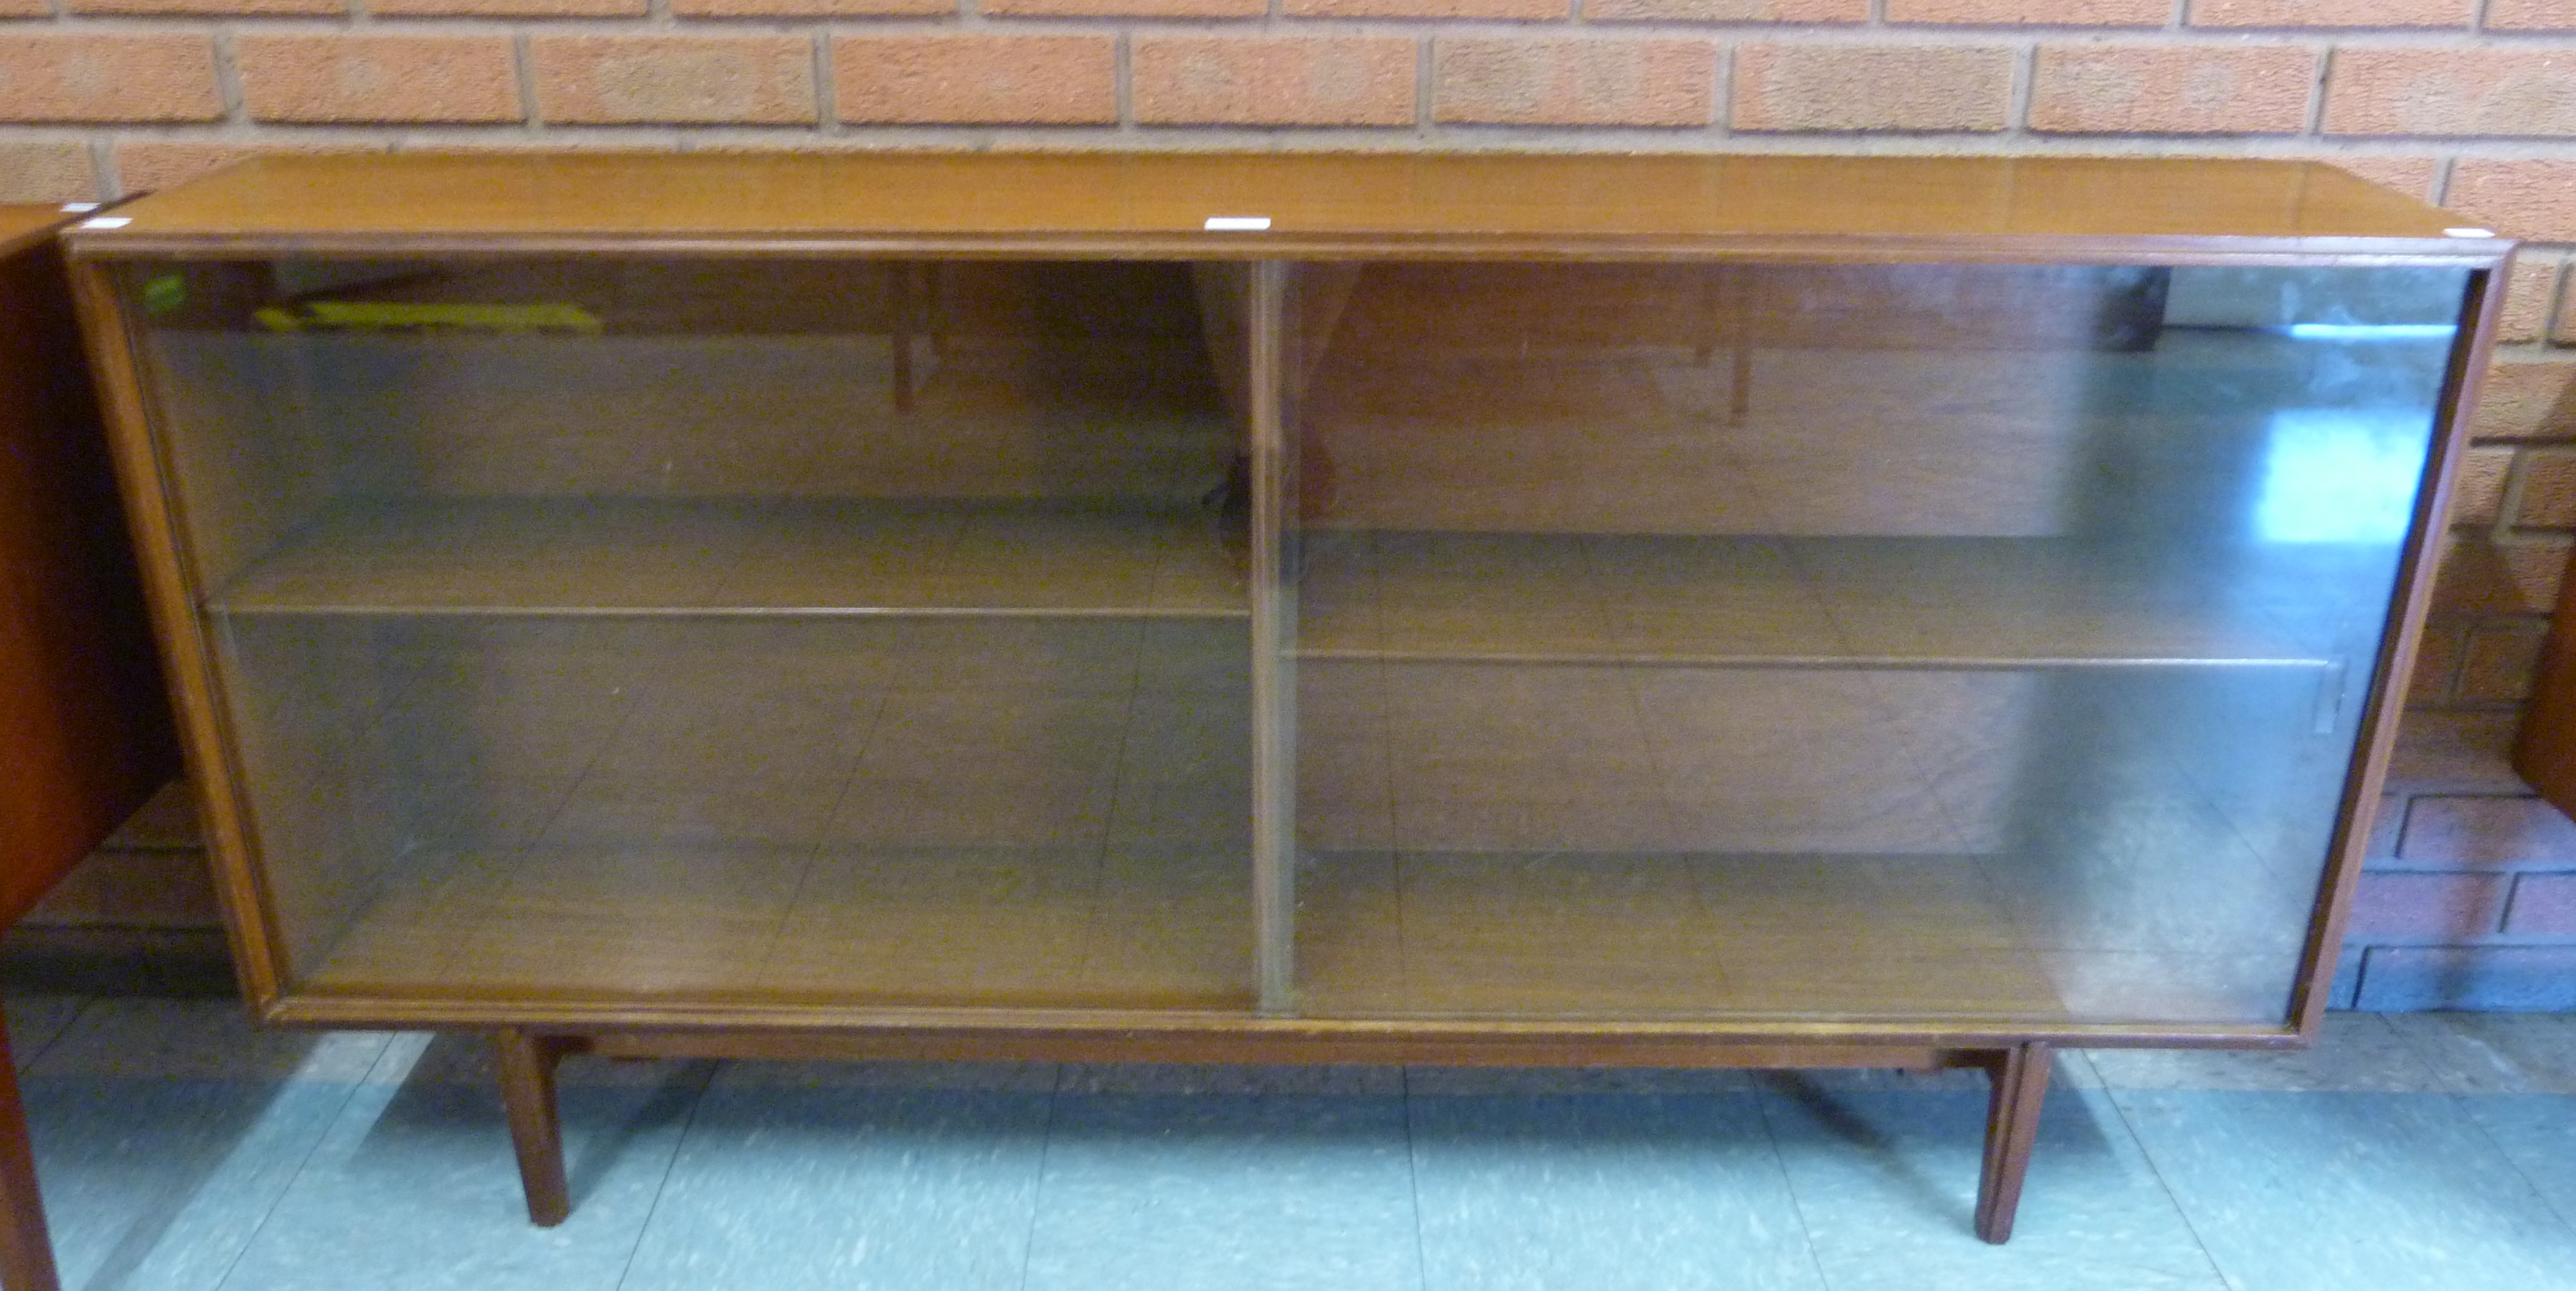 A Beaver & Tapley tola wood bookcase - Image 2 of 2